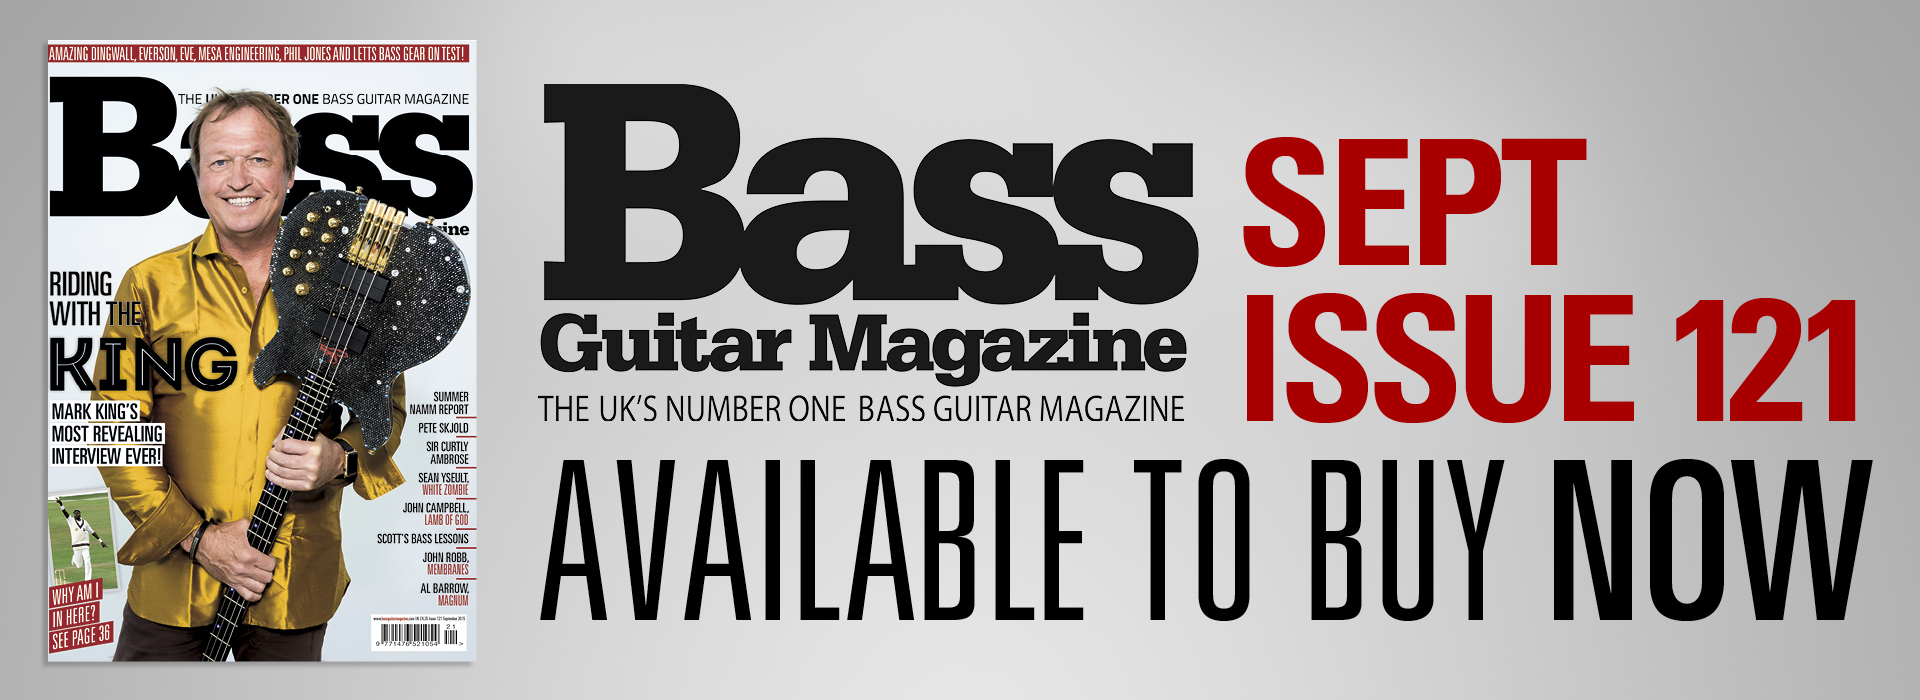 bass-web-issue-119-on-sale